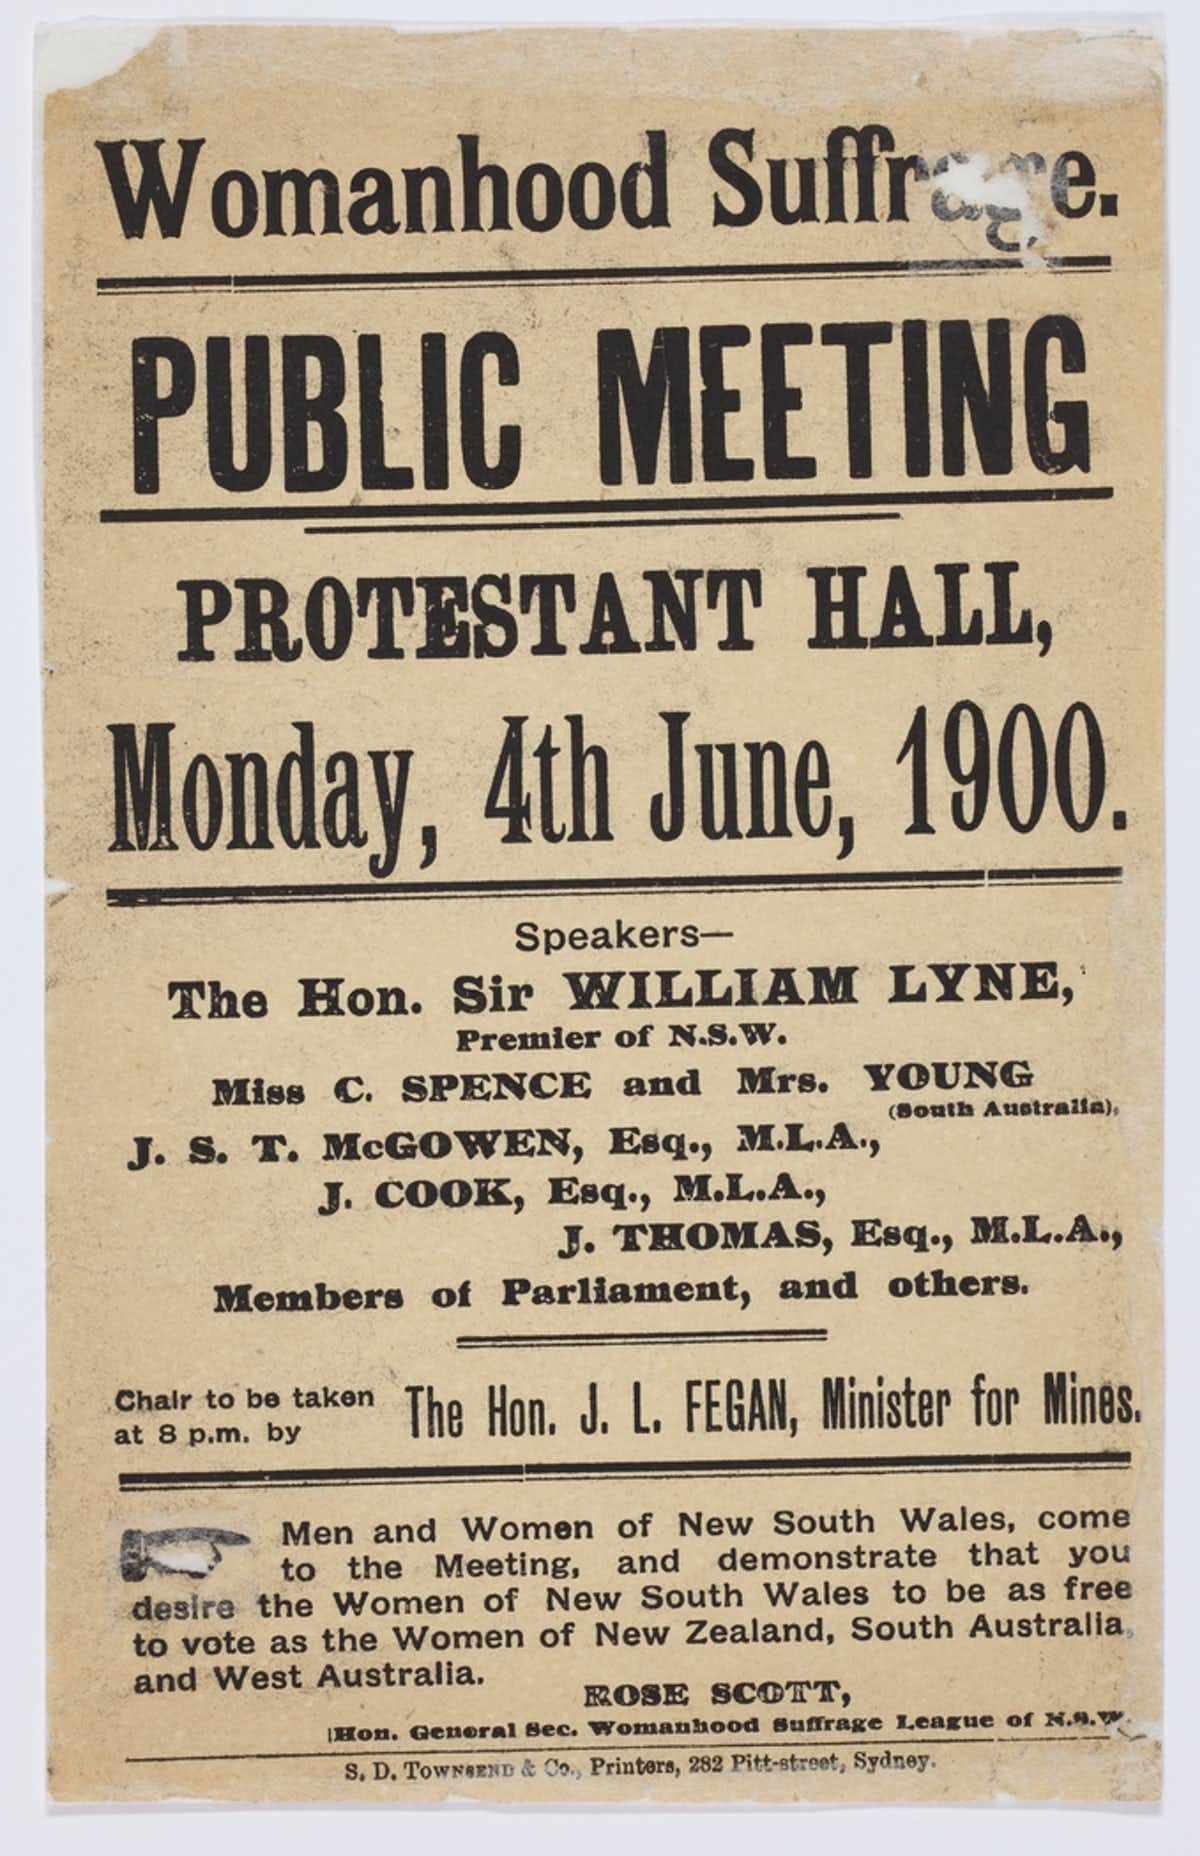 An image of a 1900 pamphlet about a public protest meeting held by Womanhood Suffrage